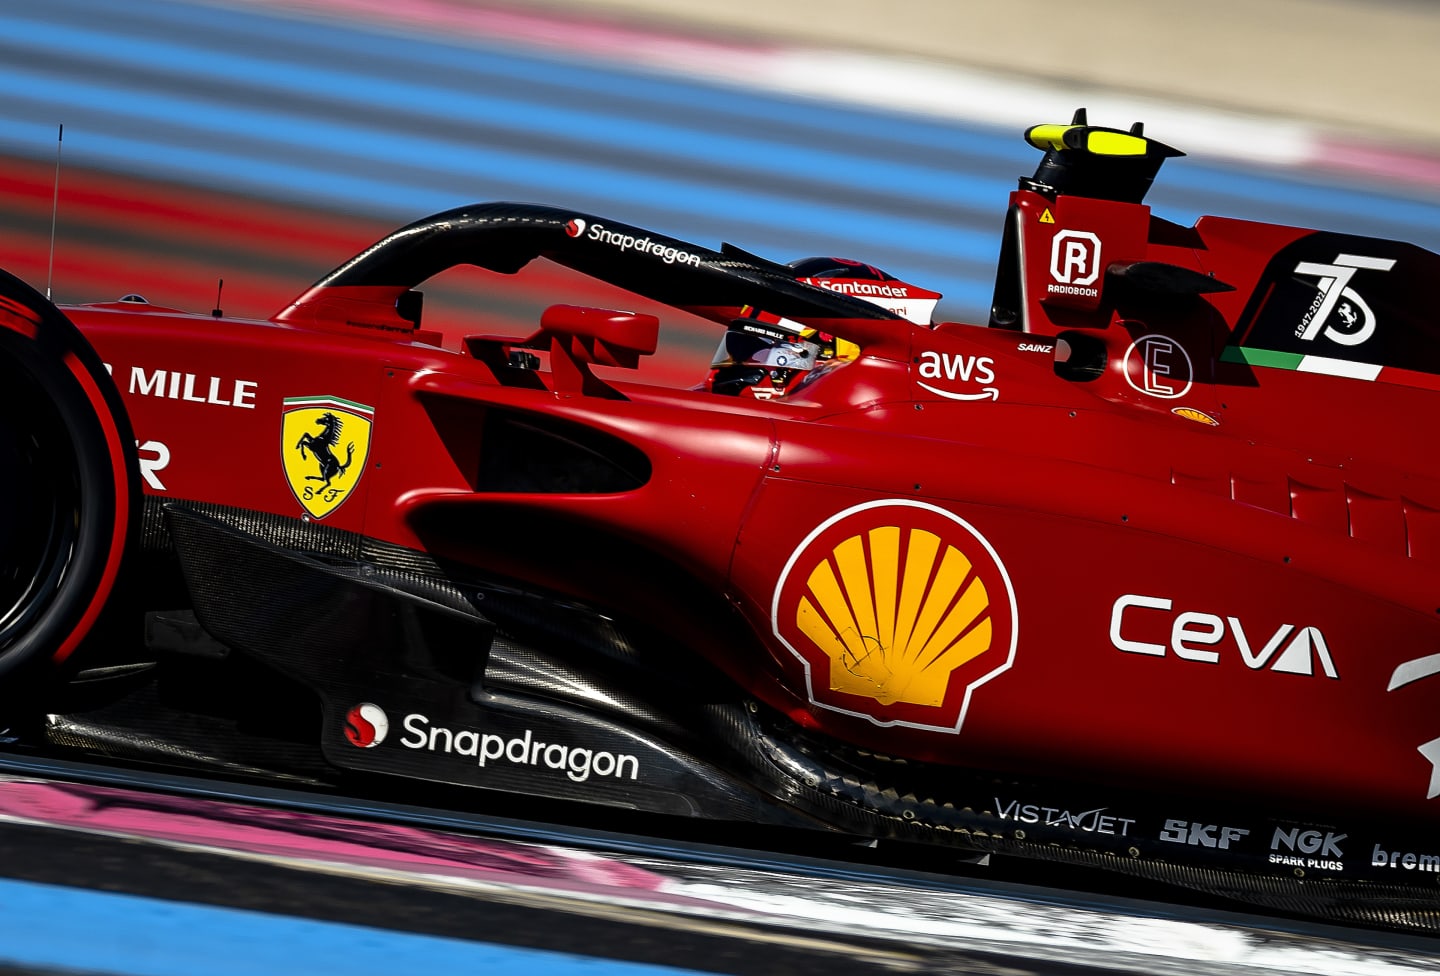 LE CASTELLET - Carlos Sainz (Ferrari) during qualifying ahead of the F1 Grand Prix of France at Circuit Paul Ricard on July 23, 2022 in Le Castellet, France. REMKO DE WAAL (Photo by ANP via Getty Images)